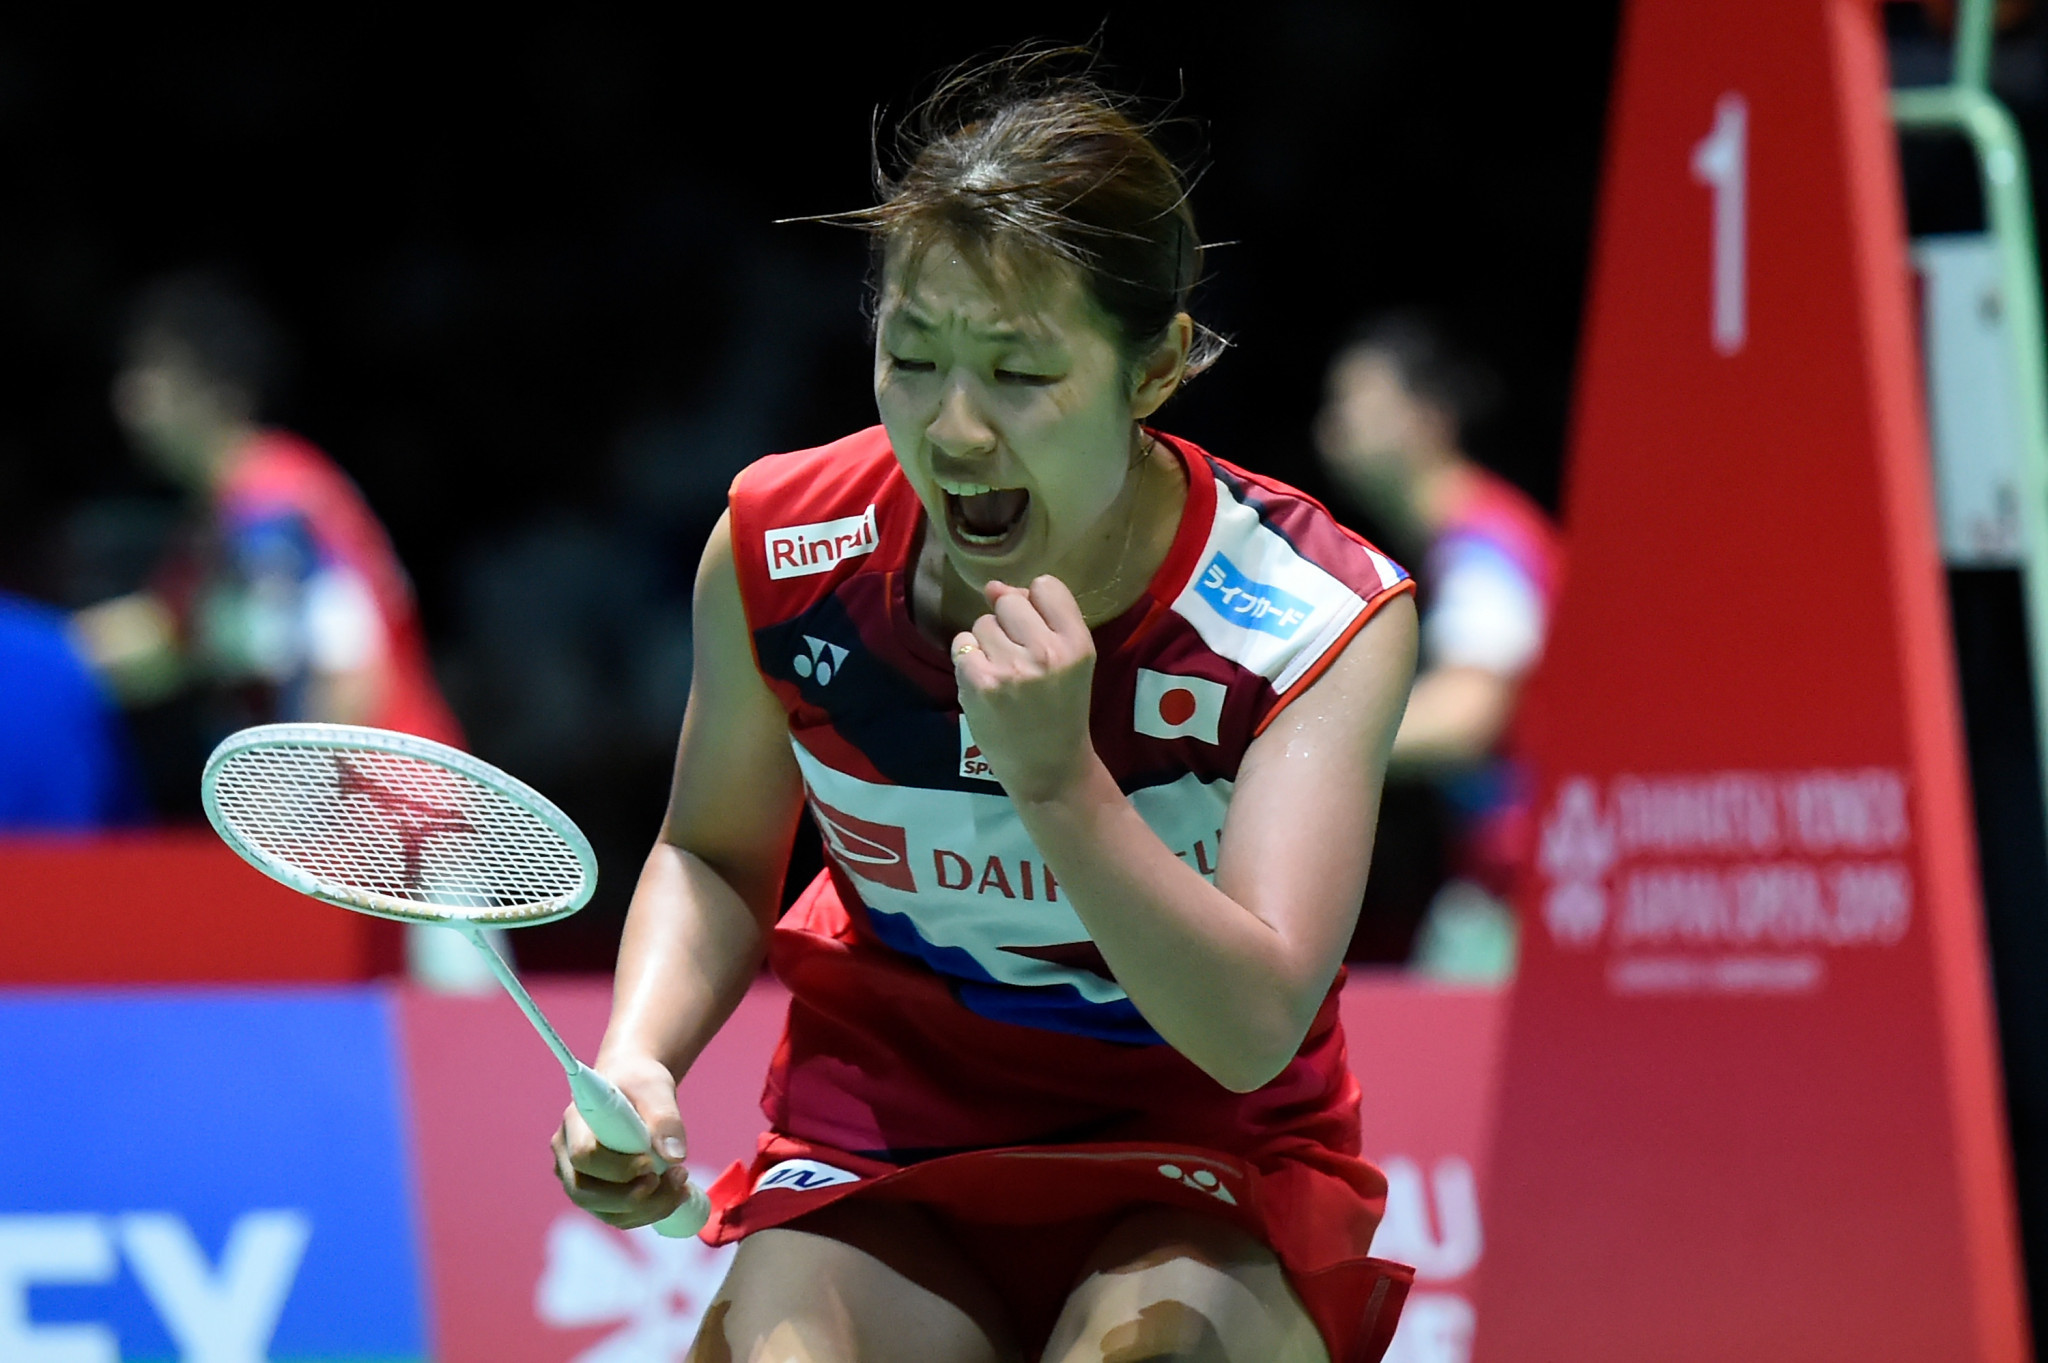 Nozomi Okuhara of Japan fended off a strong challenge from Spain's Carolina Marin to secure the women's singles crown ©Getty Images